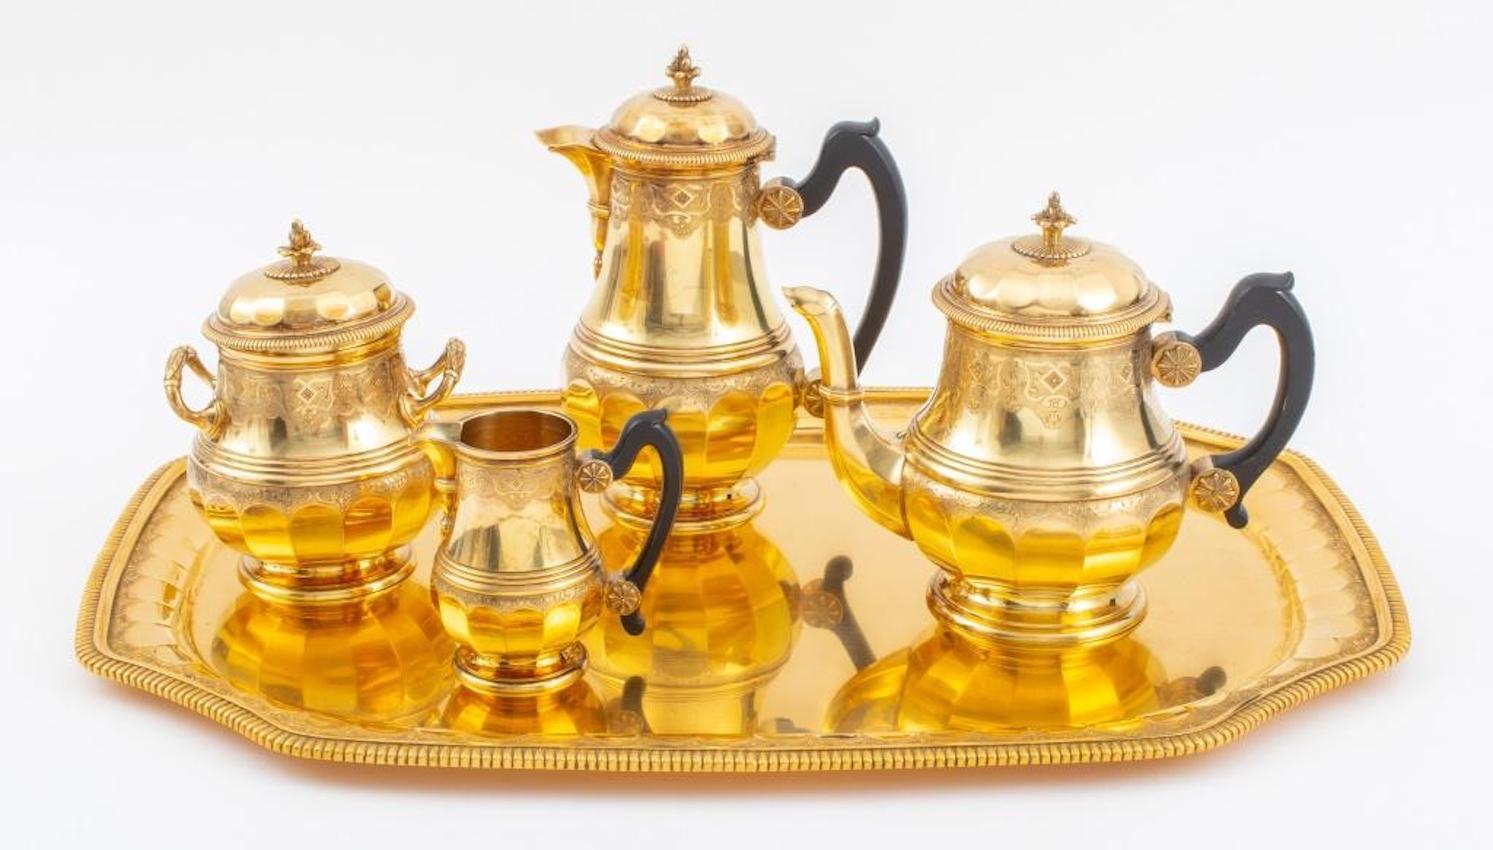 This exquisite, beautiful and rare French silver vermeil coffee and tea service was crafted by one of the most celebrated goldsmiths in Paris. Fashioned in the exquisite style of the Second Empire, this five-piece tea and coffee service is crafted